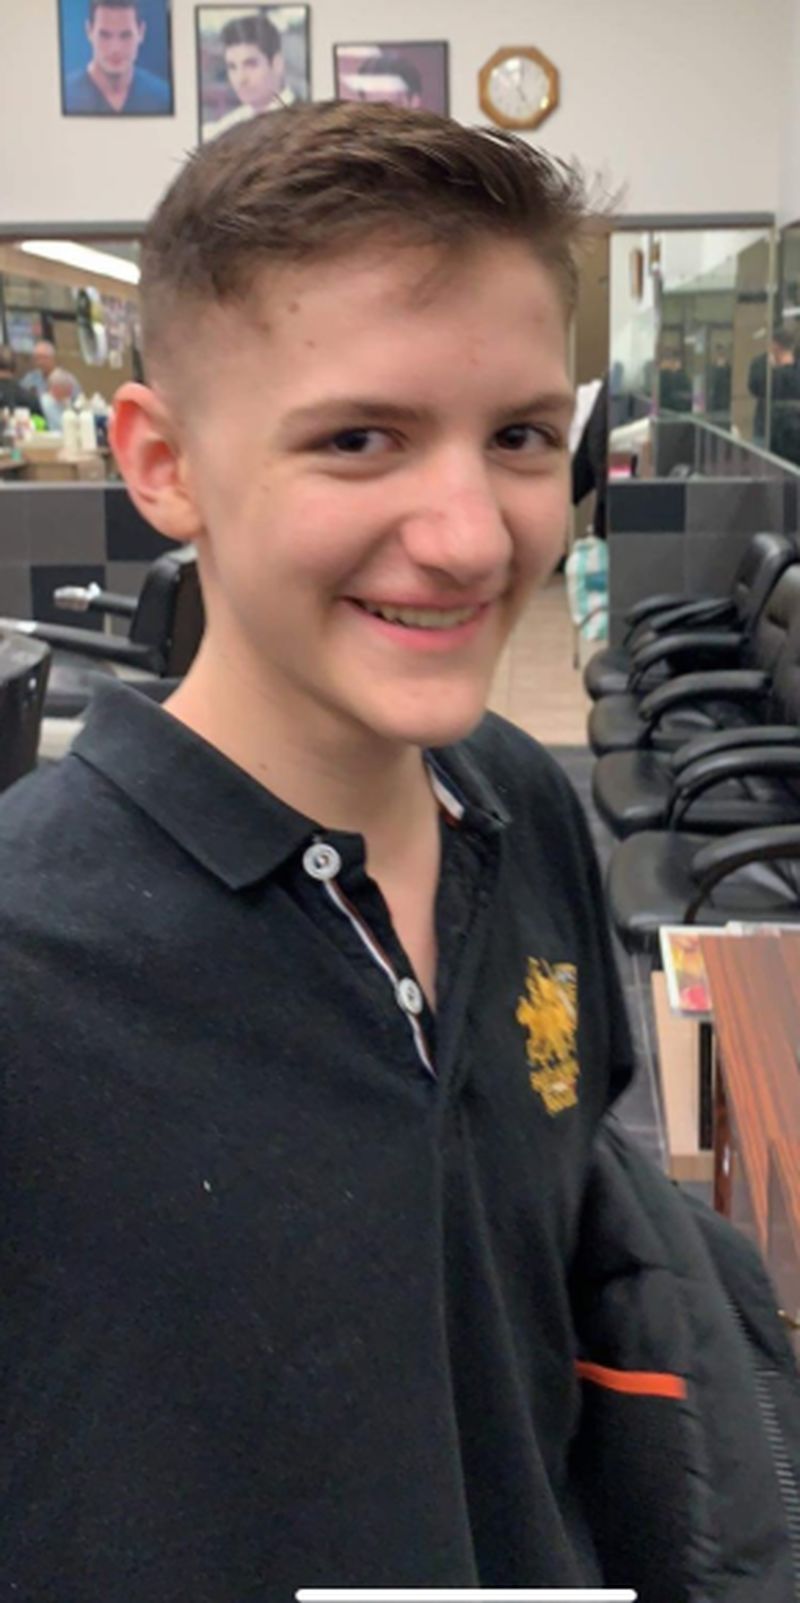 police search for missing toronto boy andrew whitlock